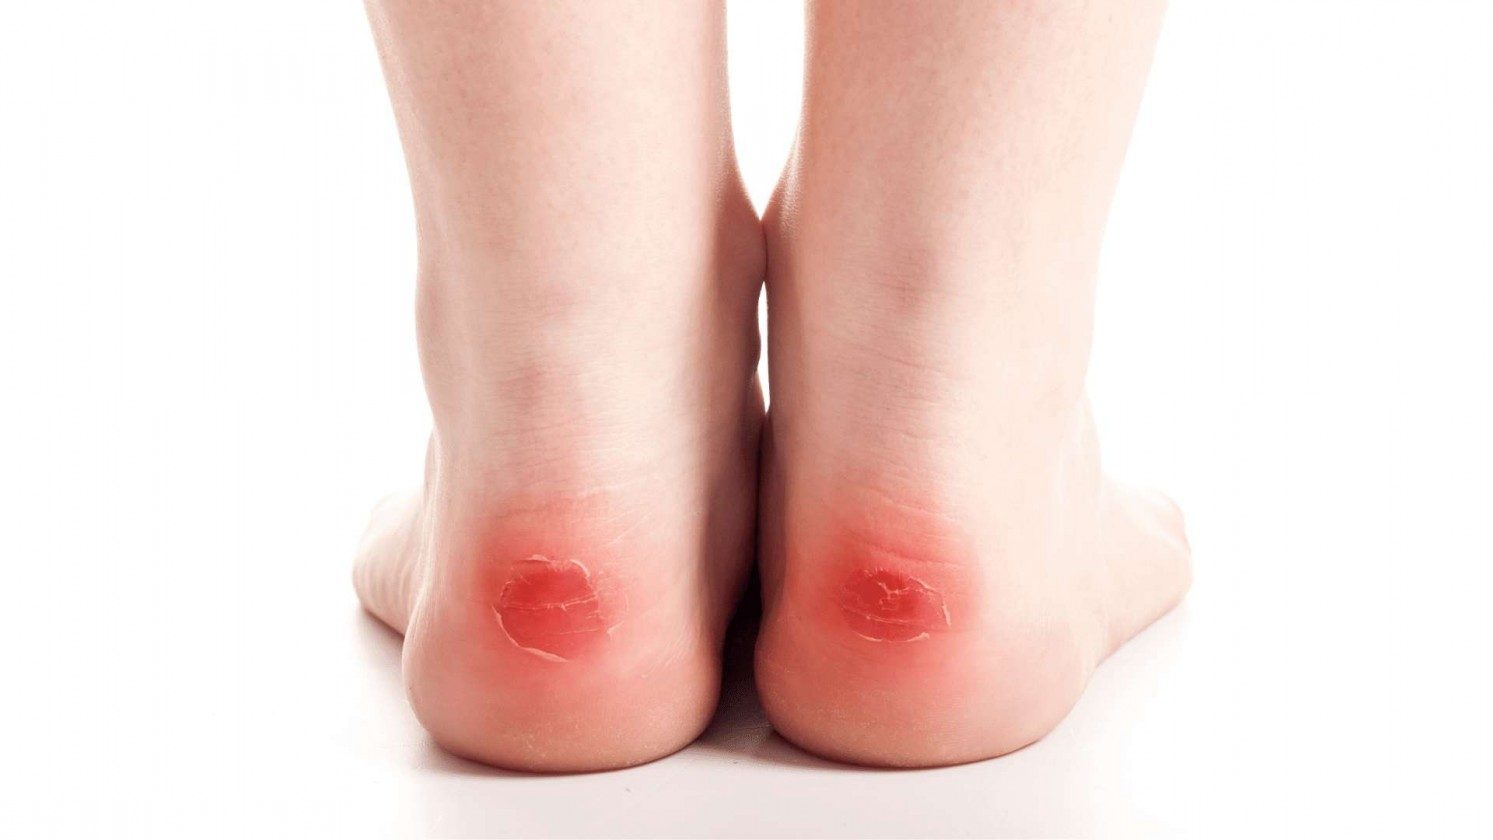 Blisters (Source: thefeetpeople.com.au)